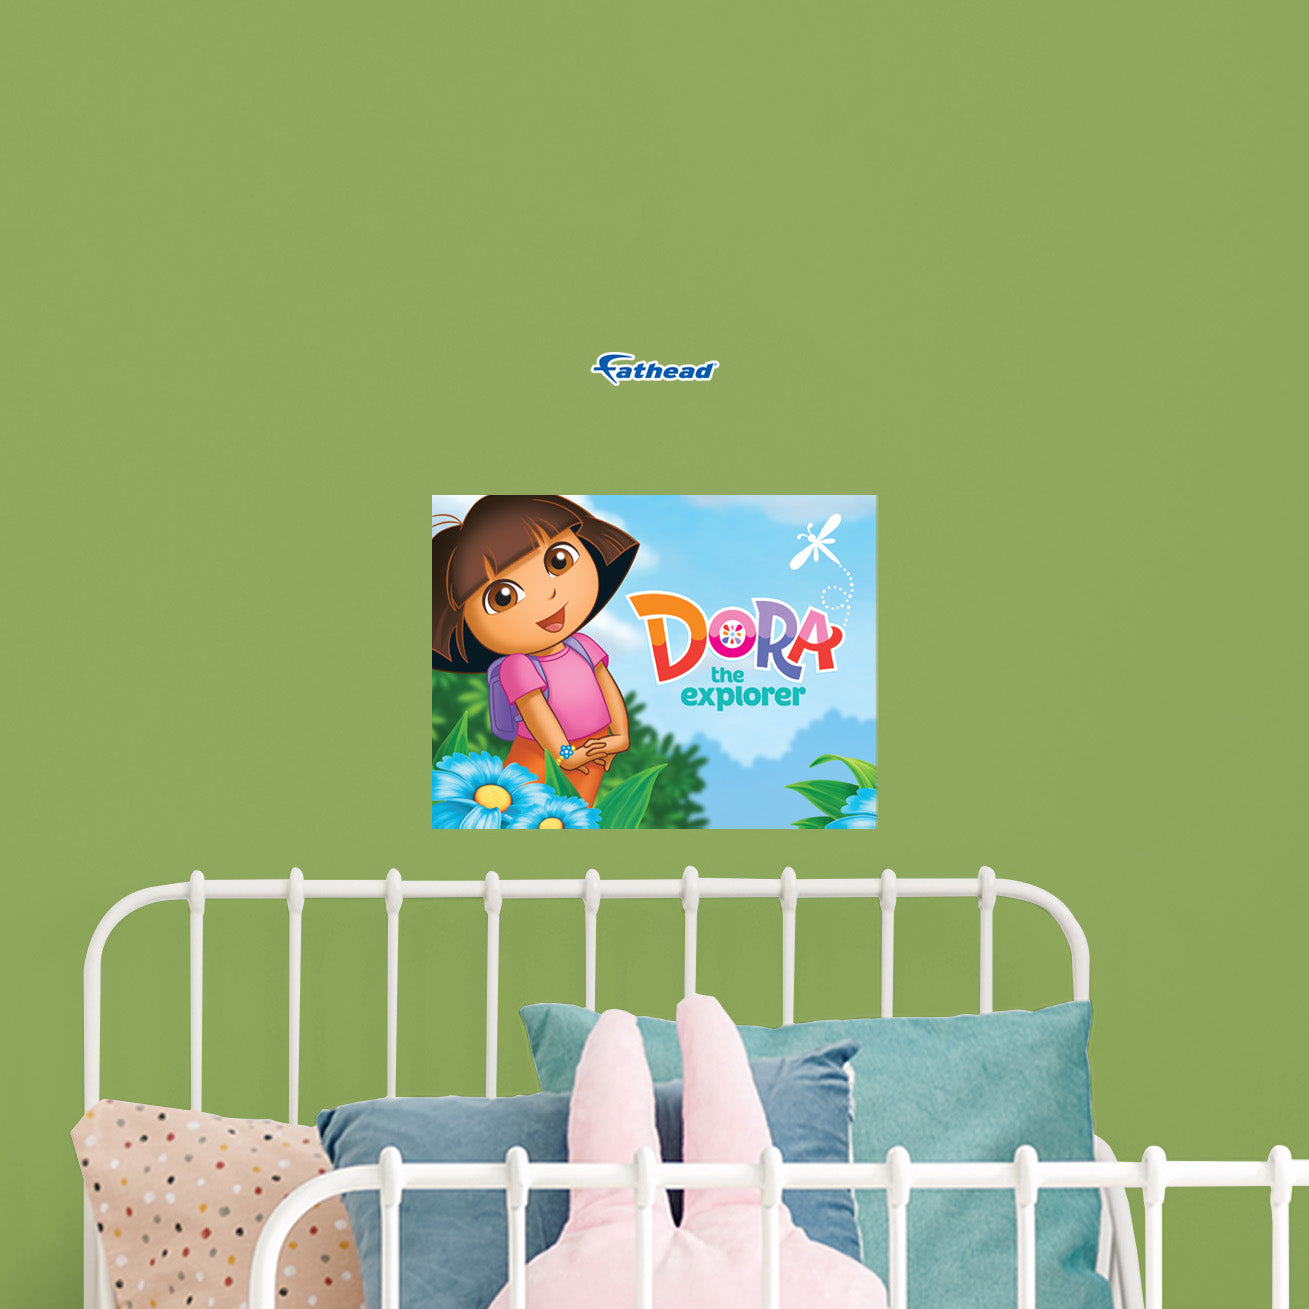 Dora the Explorer: Dora Poster - Officially Licensed Nickelodeon Removable Adhesive Decal